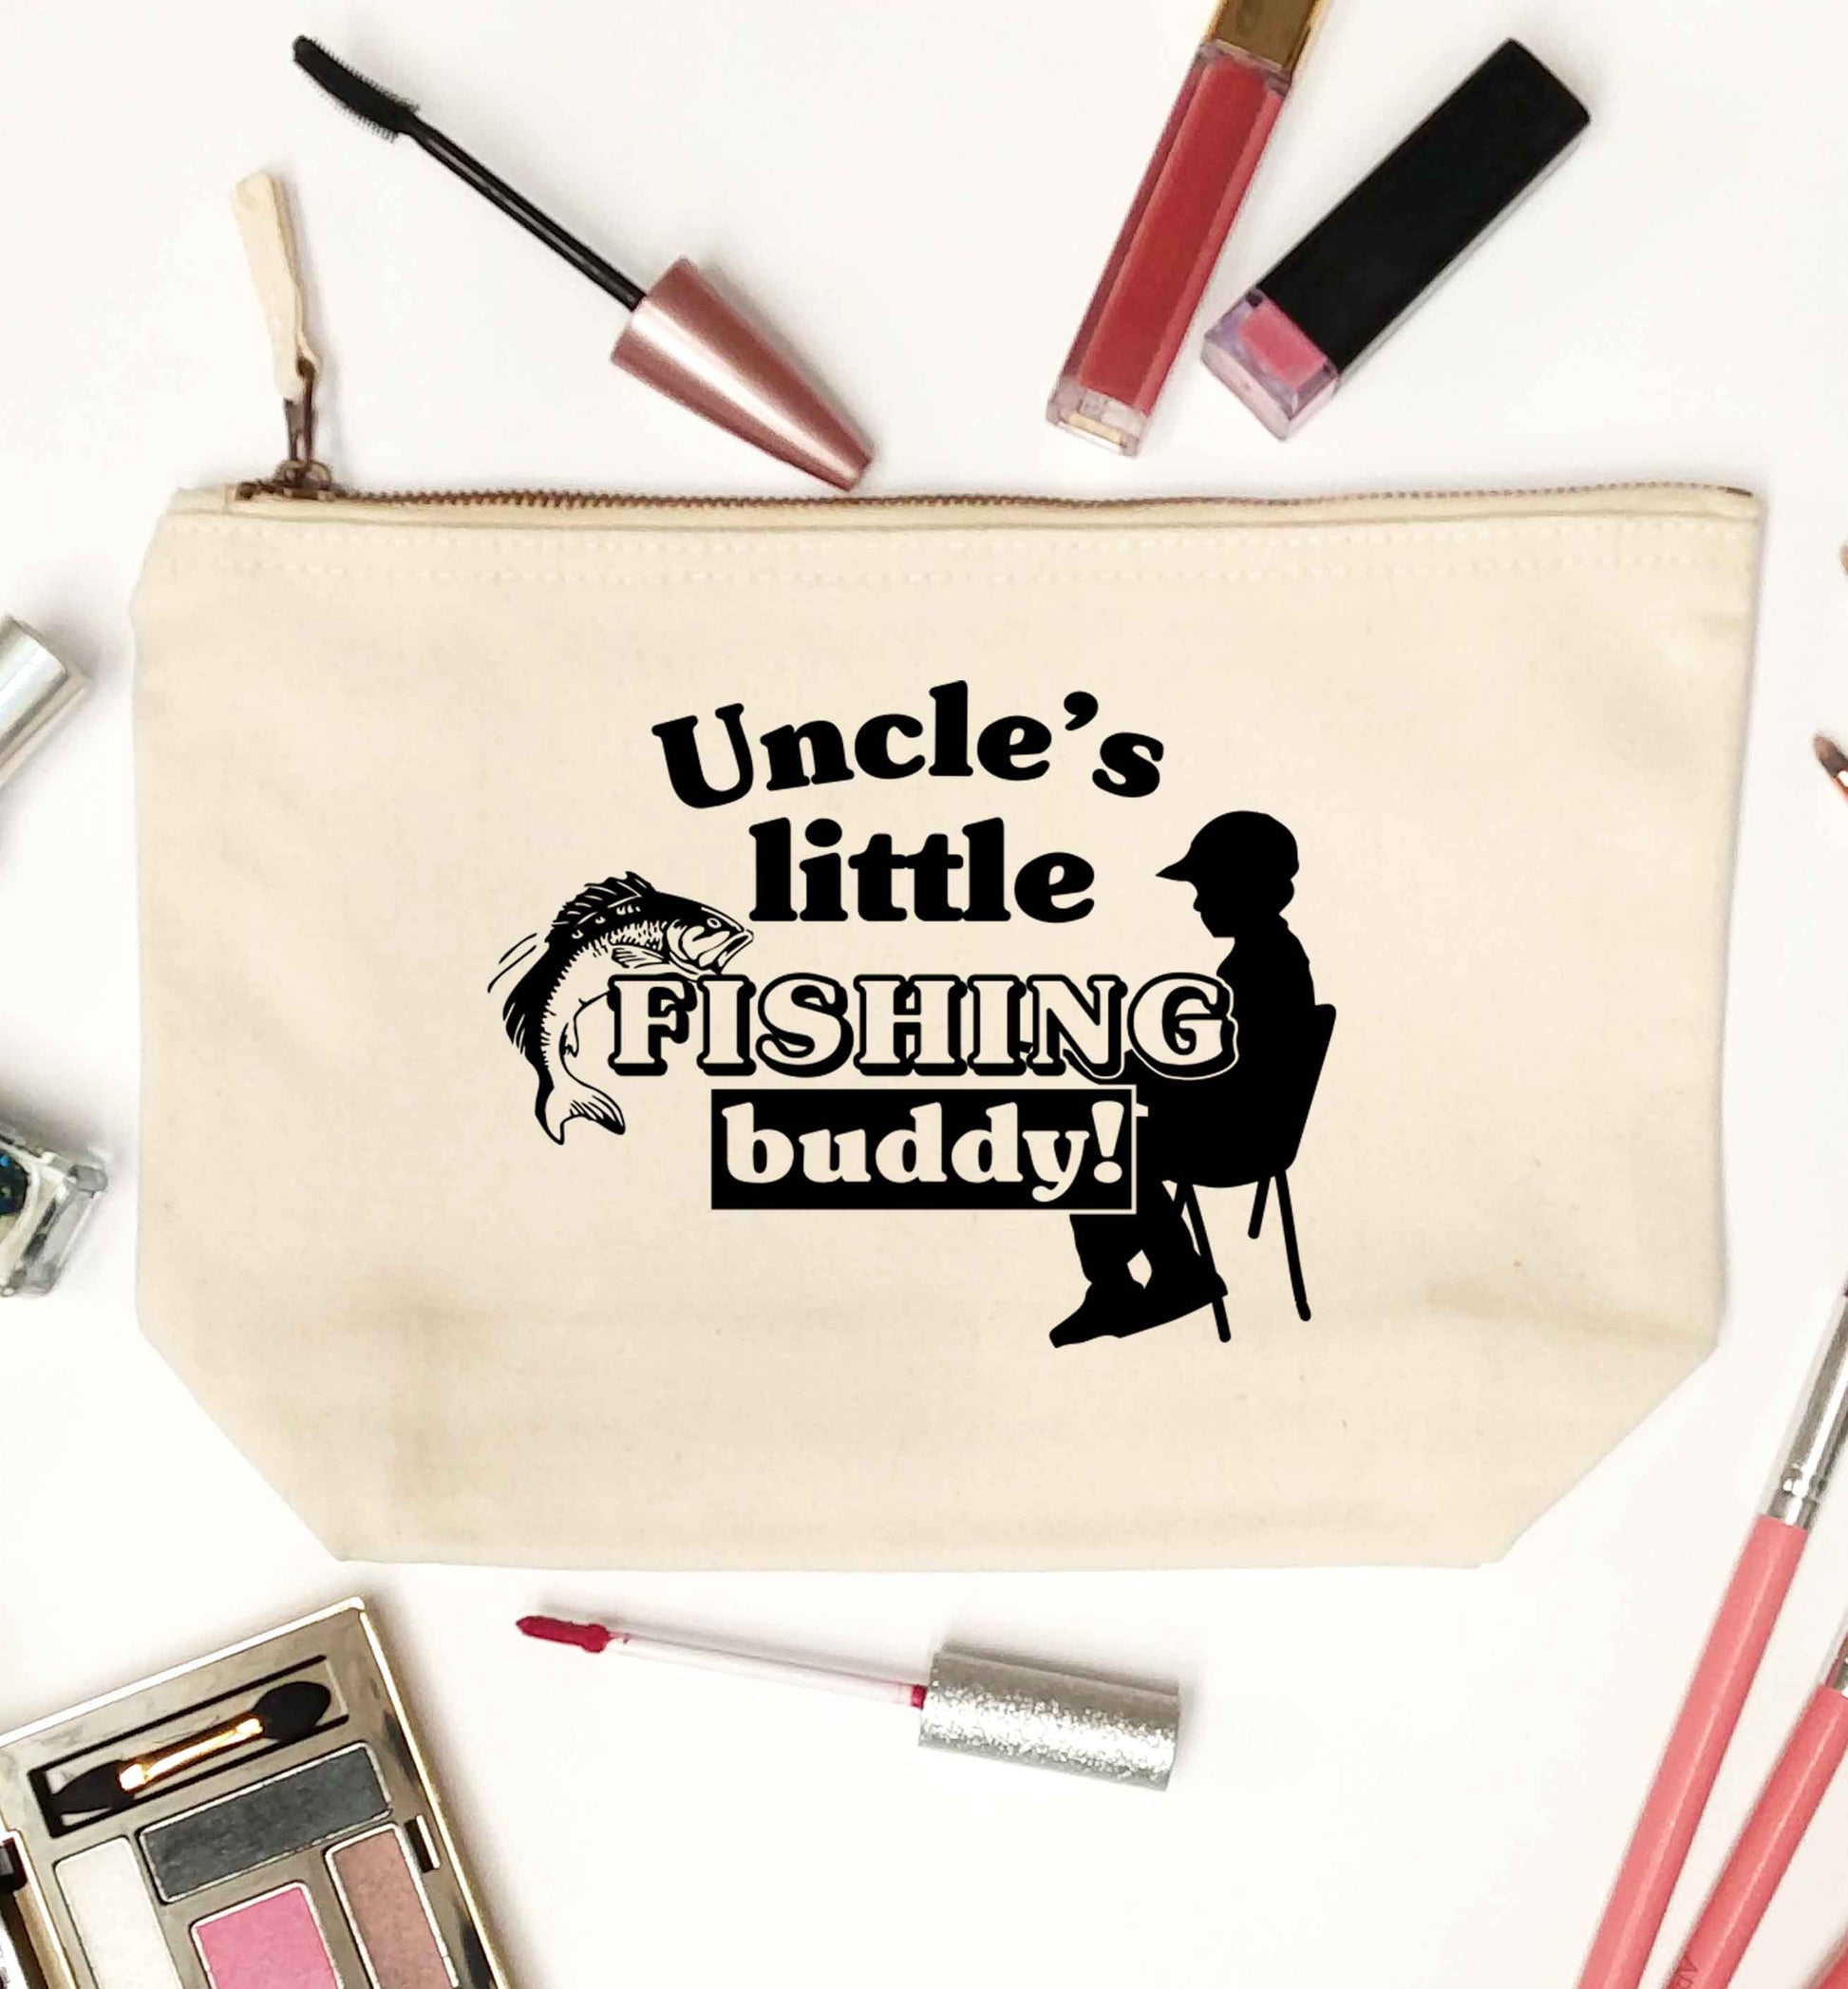 Uncle's little fishing buddy natural makeup bag